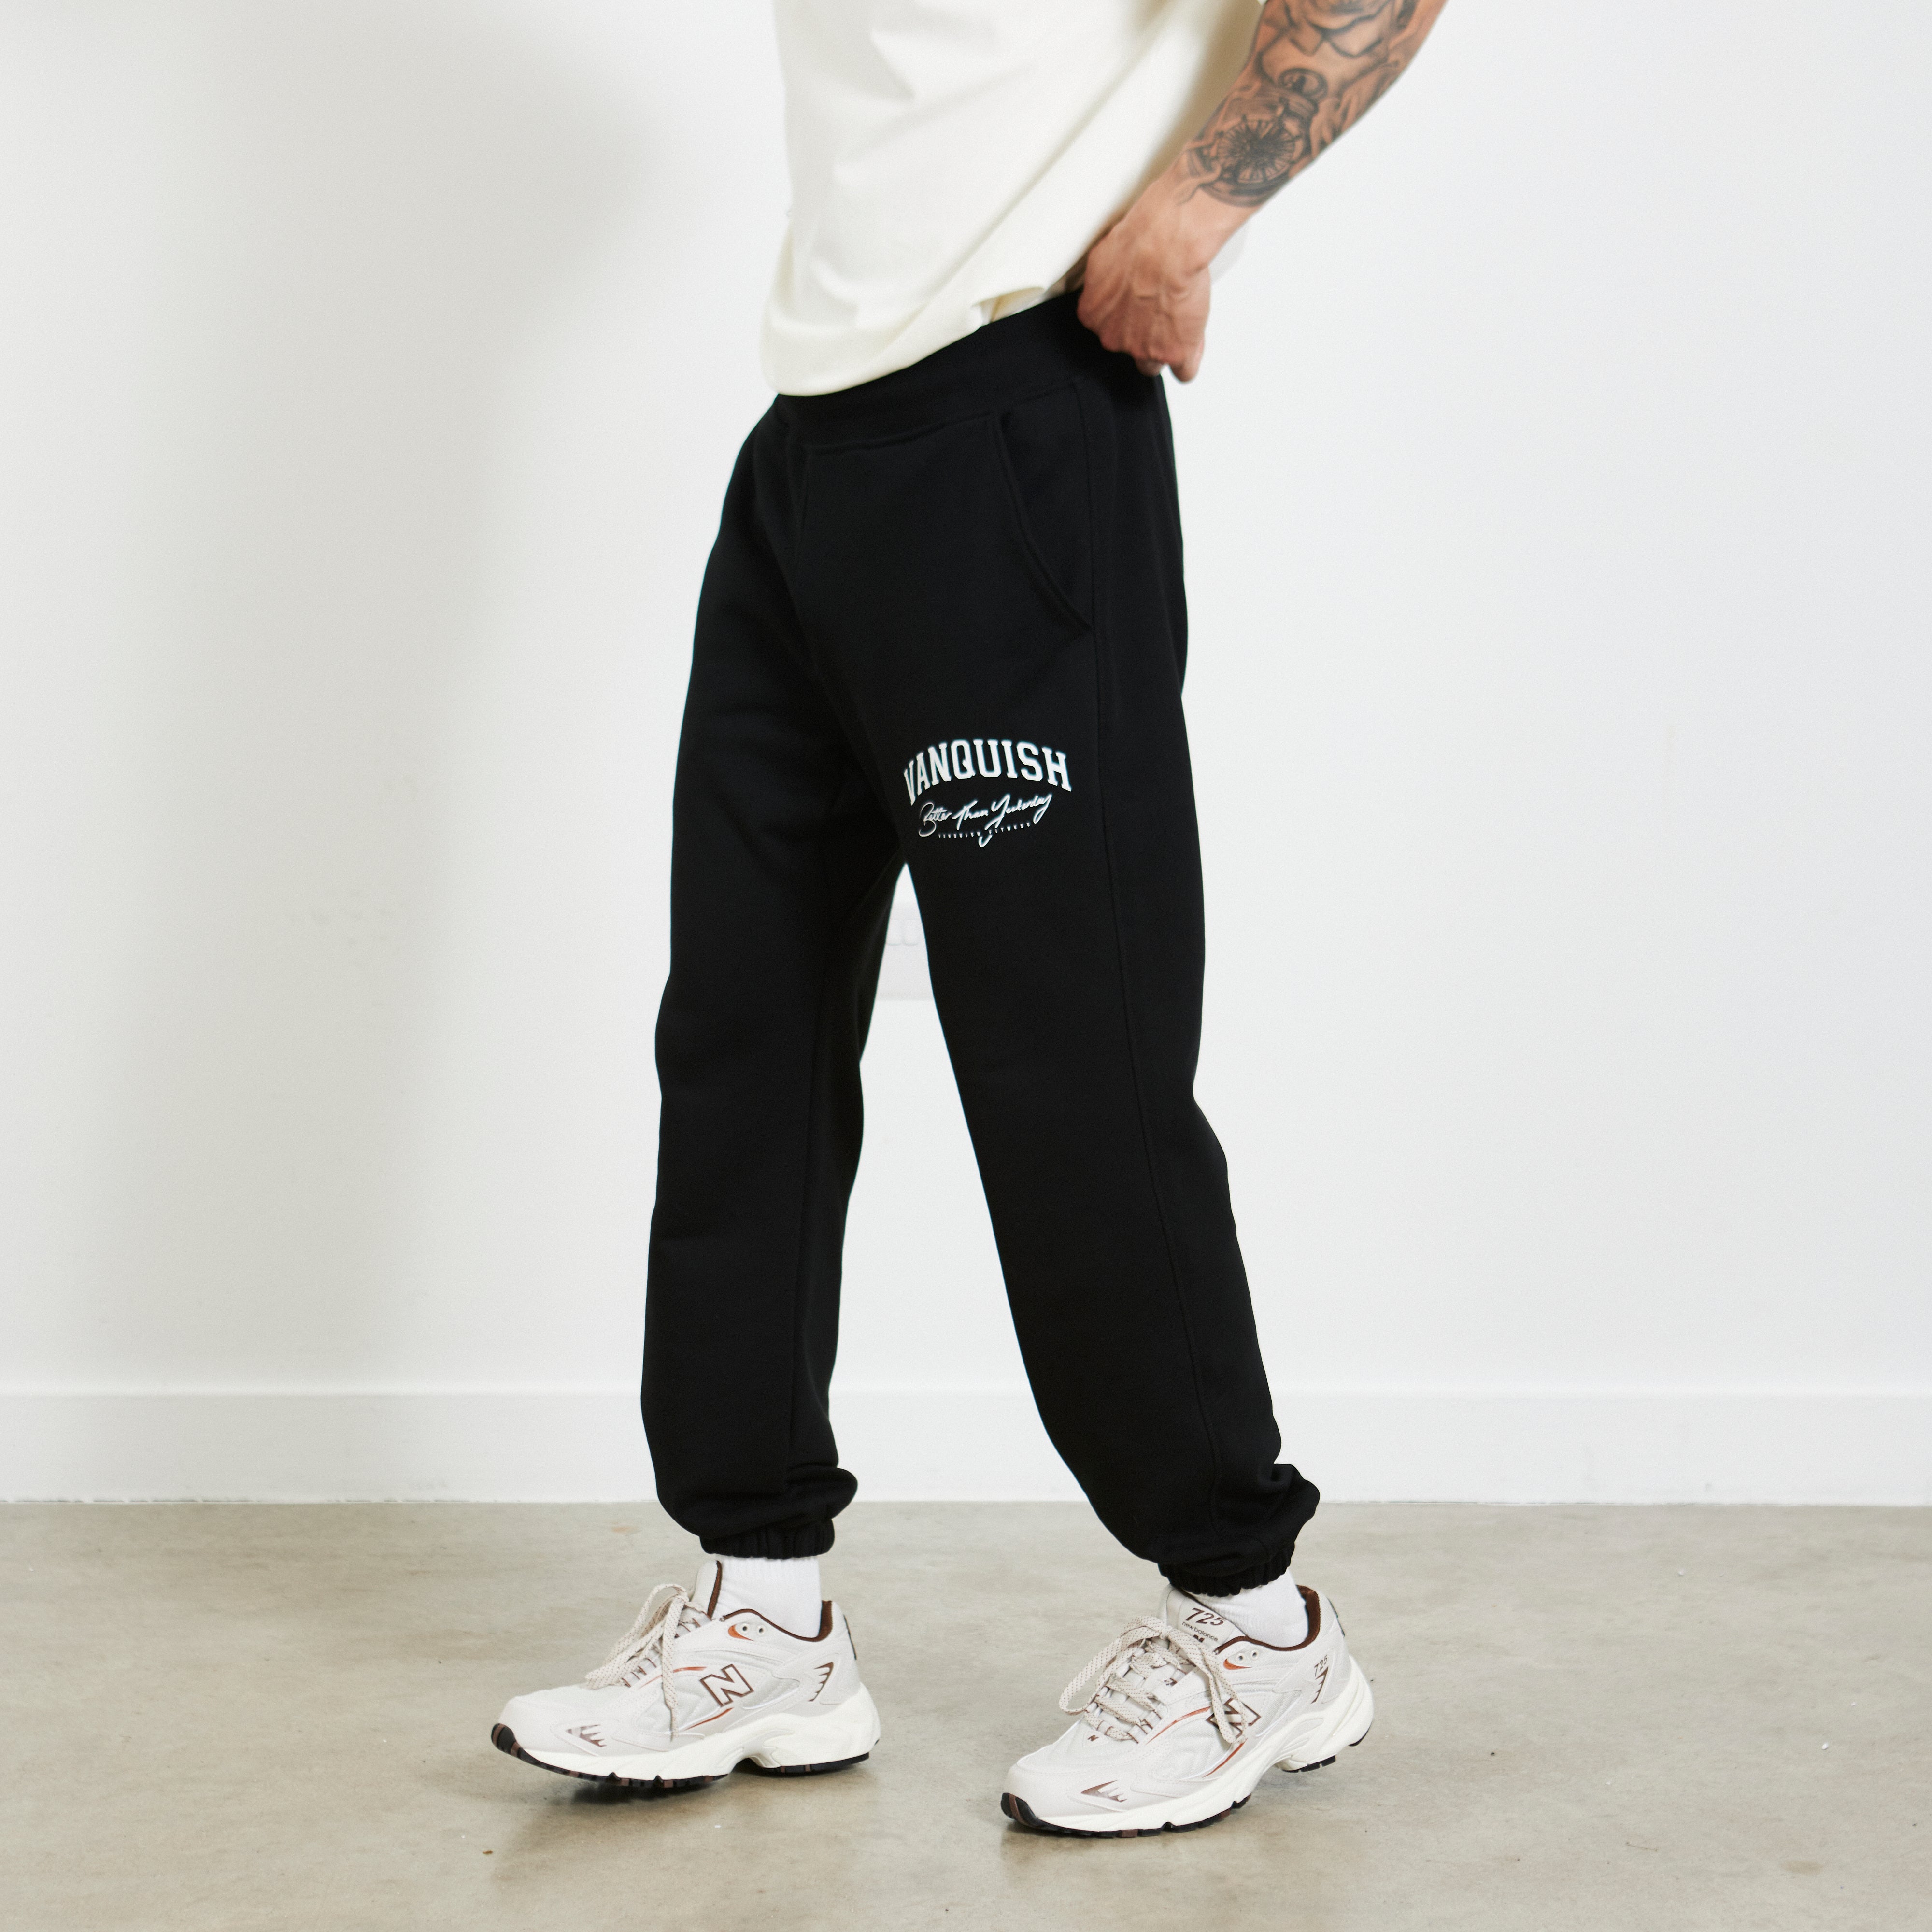 Vanquish Better Than Yesterday Black Relaxed Fit Sweatpants